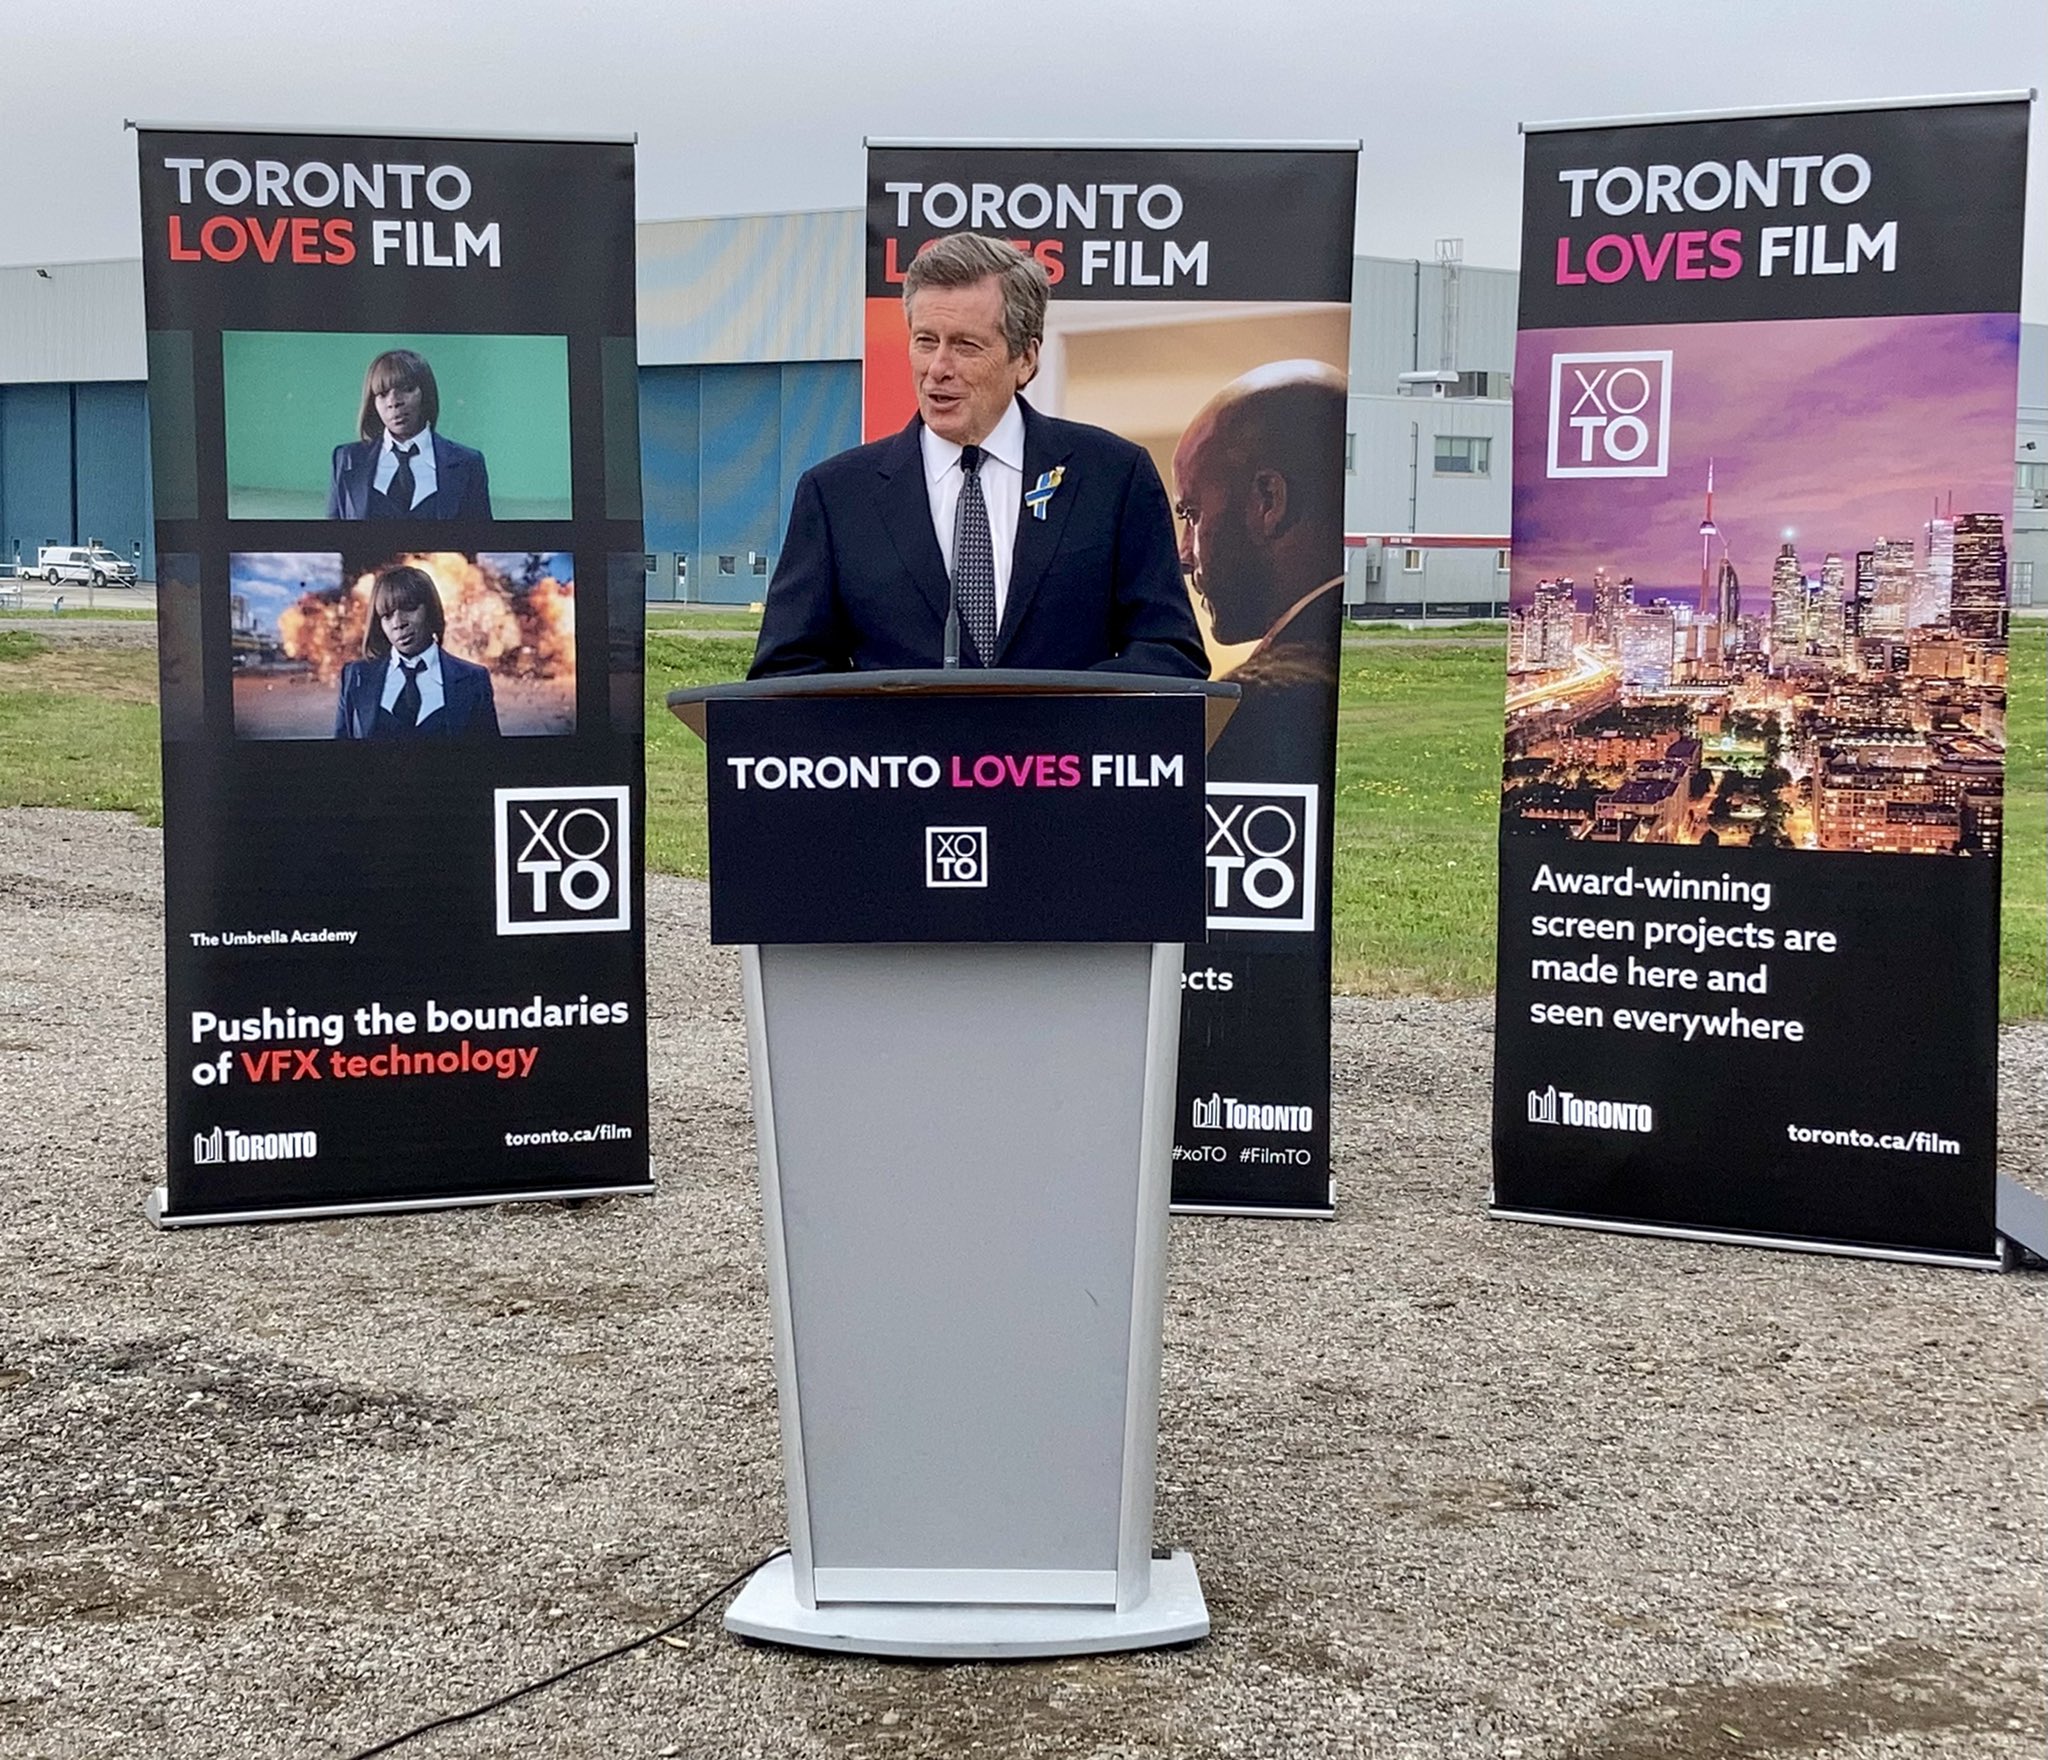 Mayor John Tory to lead first in-person Toronto film industry mission